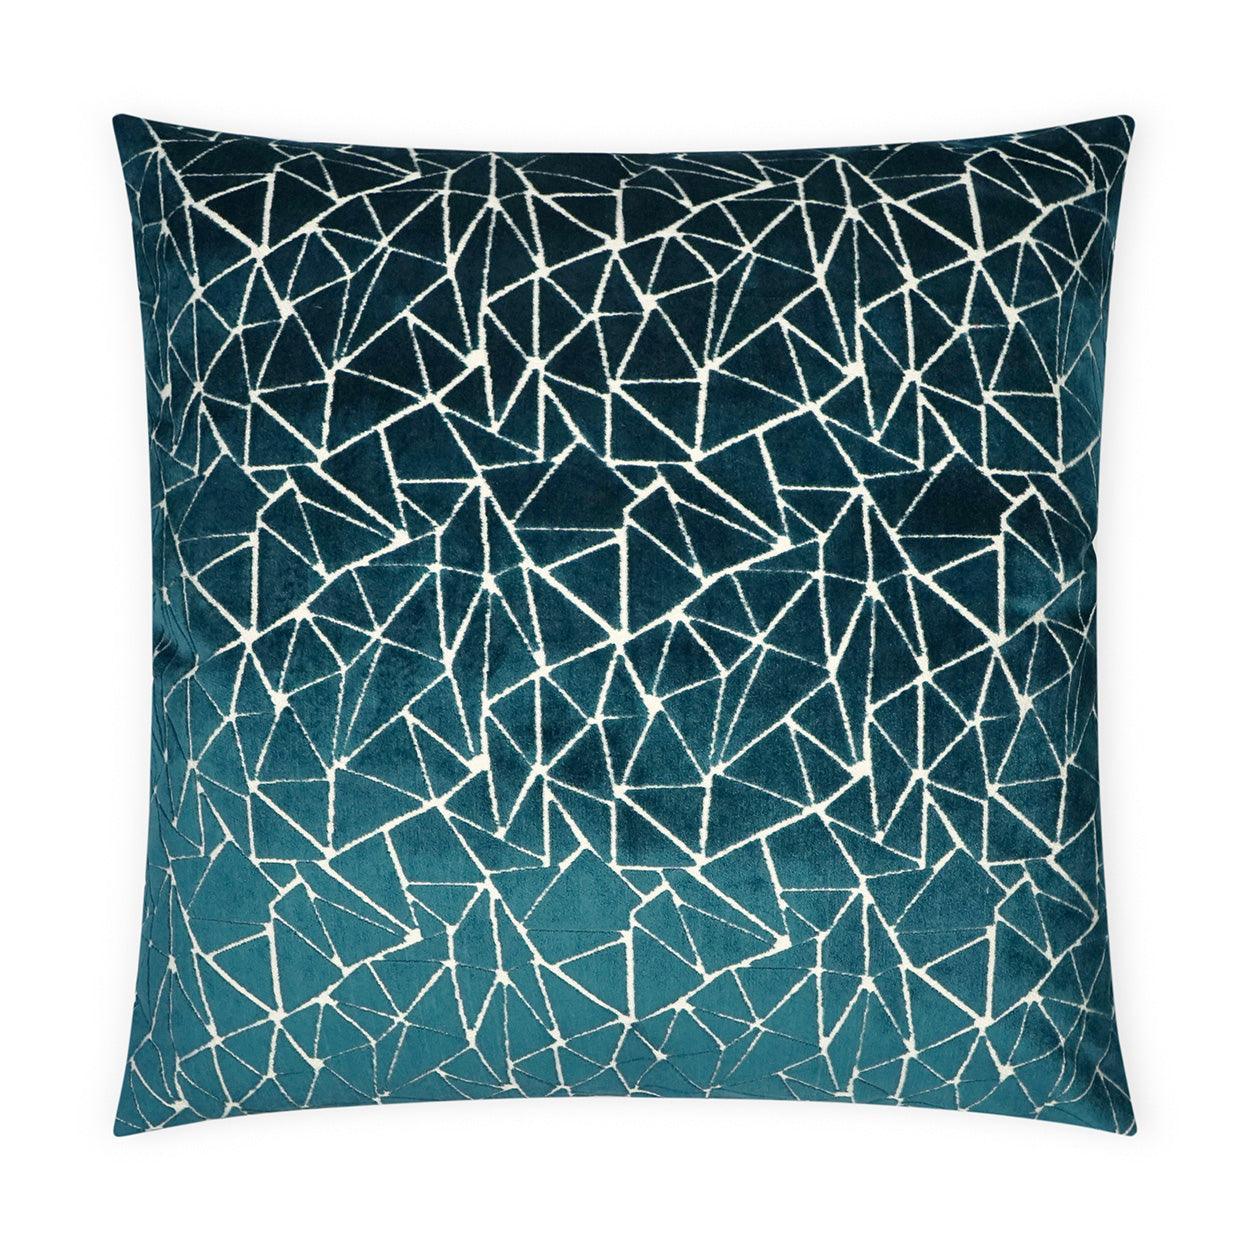 Finale Teal Geometric Turquoise Teal Large Throw Pillow With Insert - Uptown Sebastian